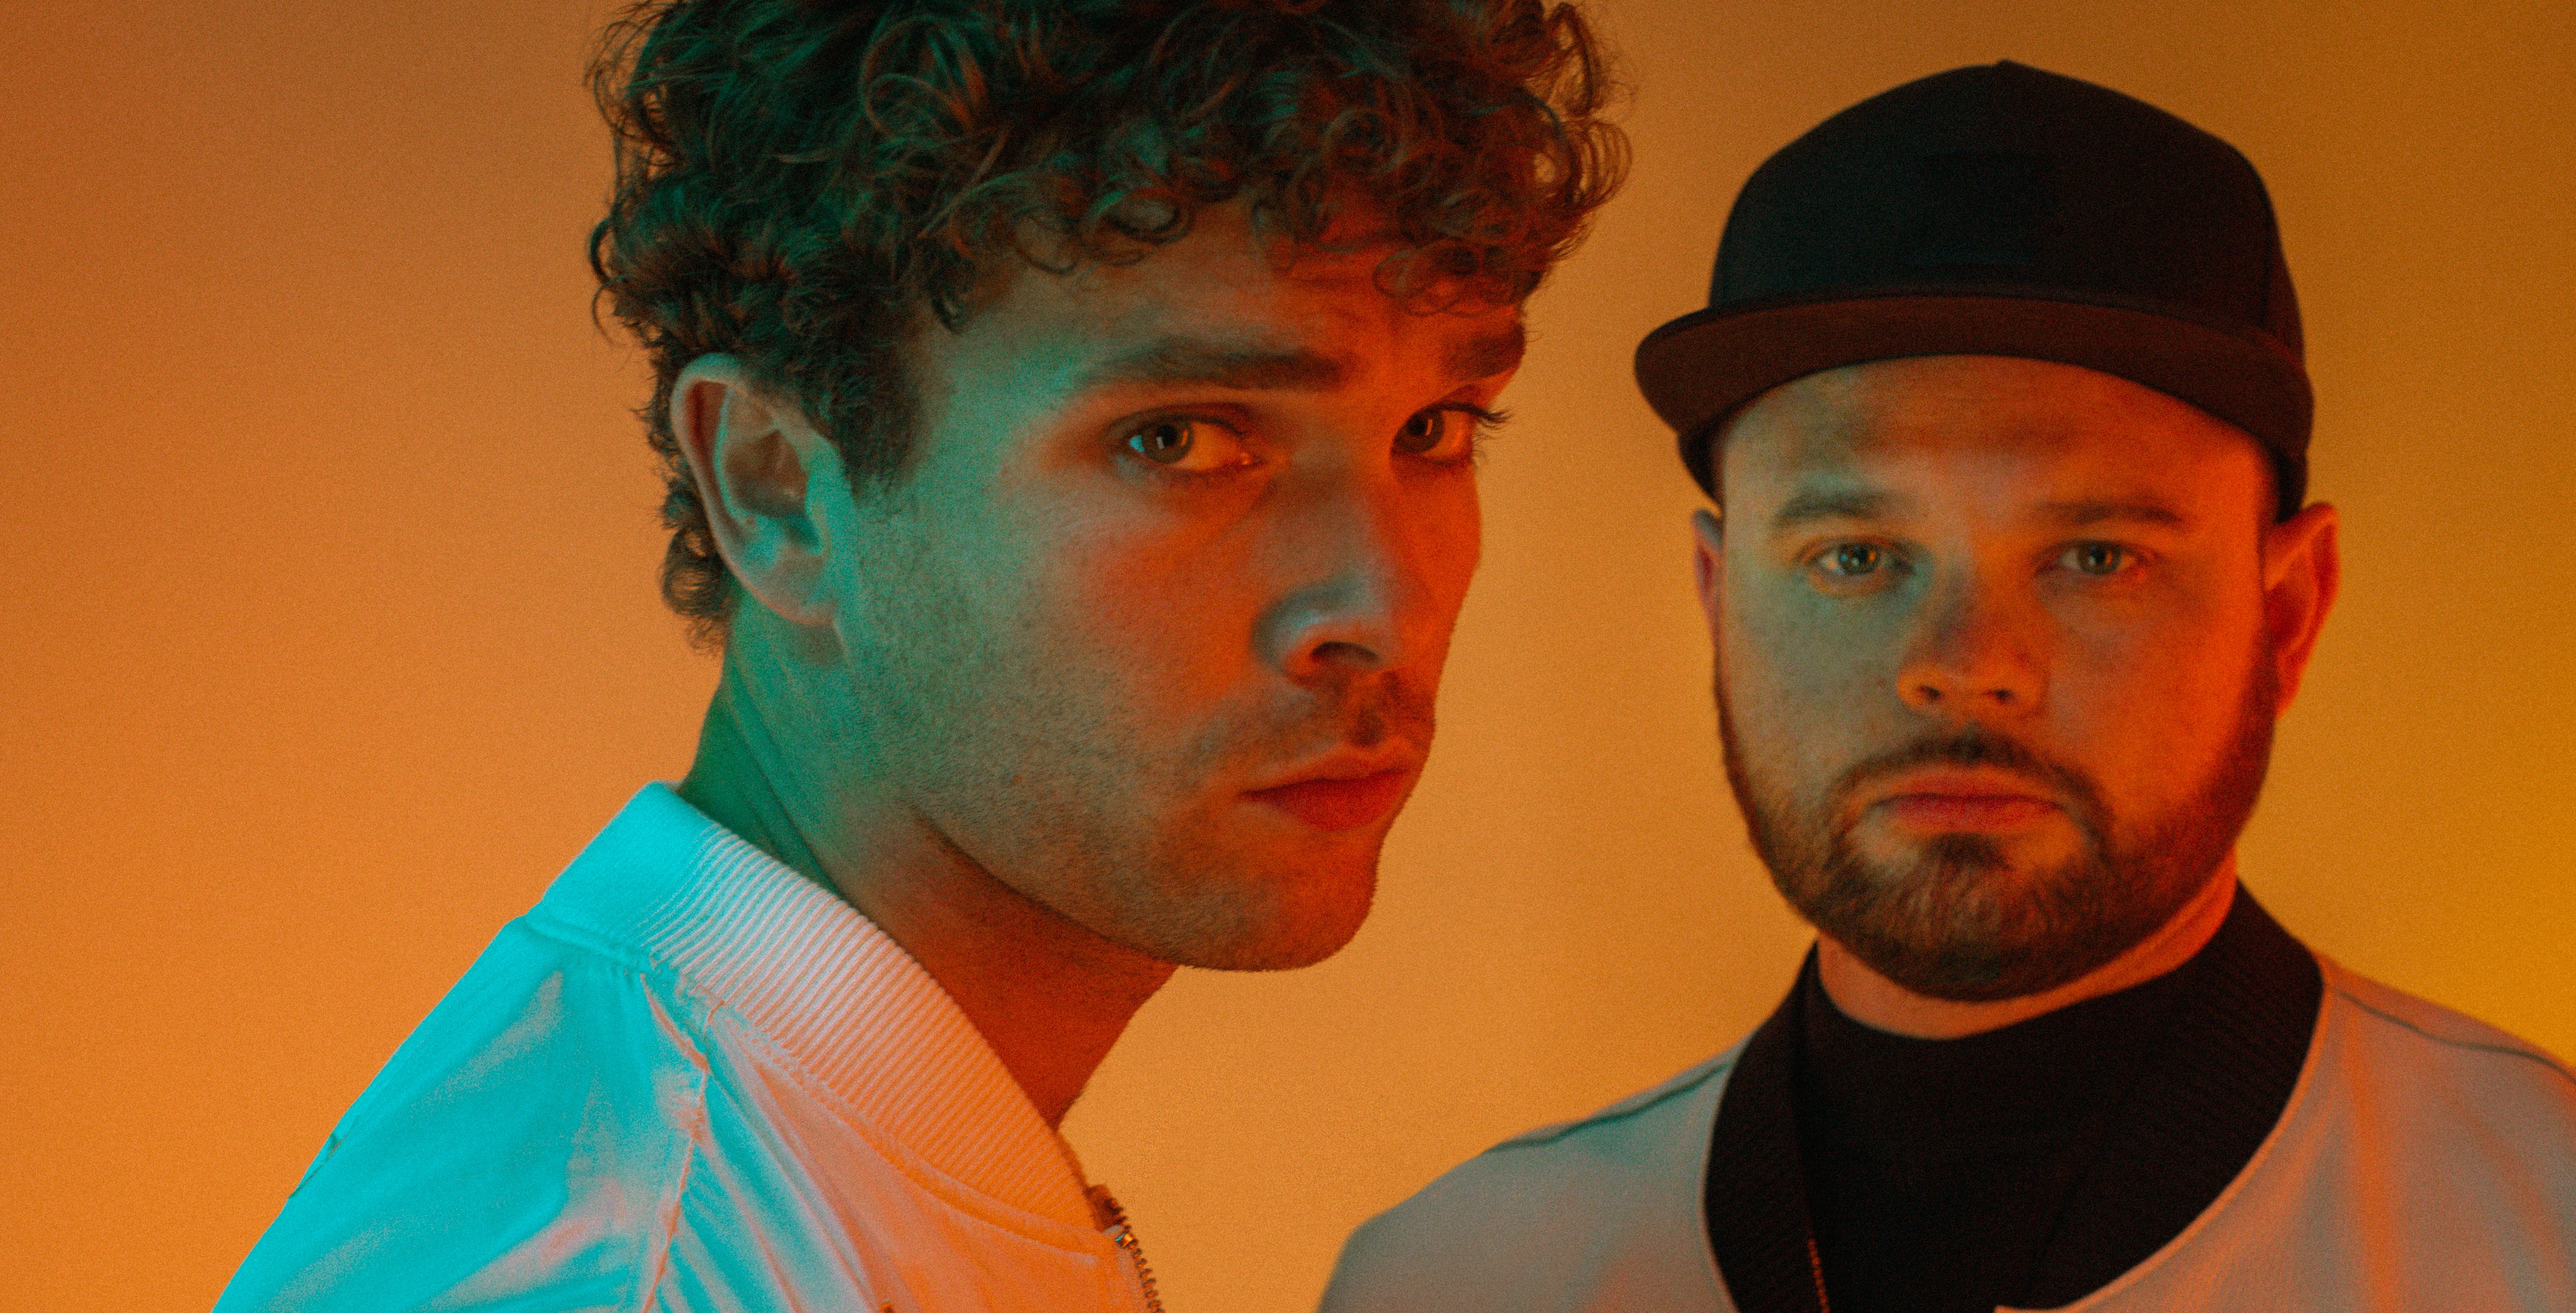 Royal Blood’s Mike Kerr Opens Up About Road To New Album: “When I Got Sober, I Had To Relearn How To Write Songs”